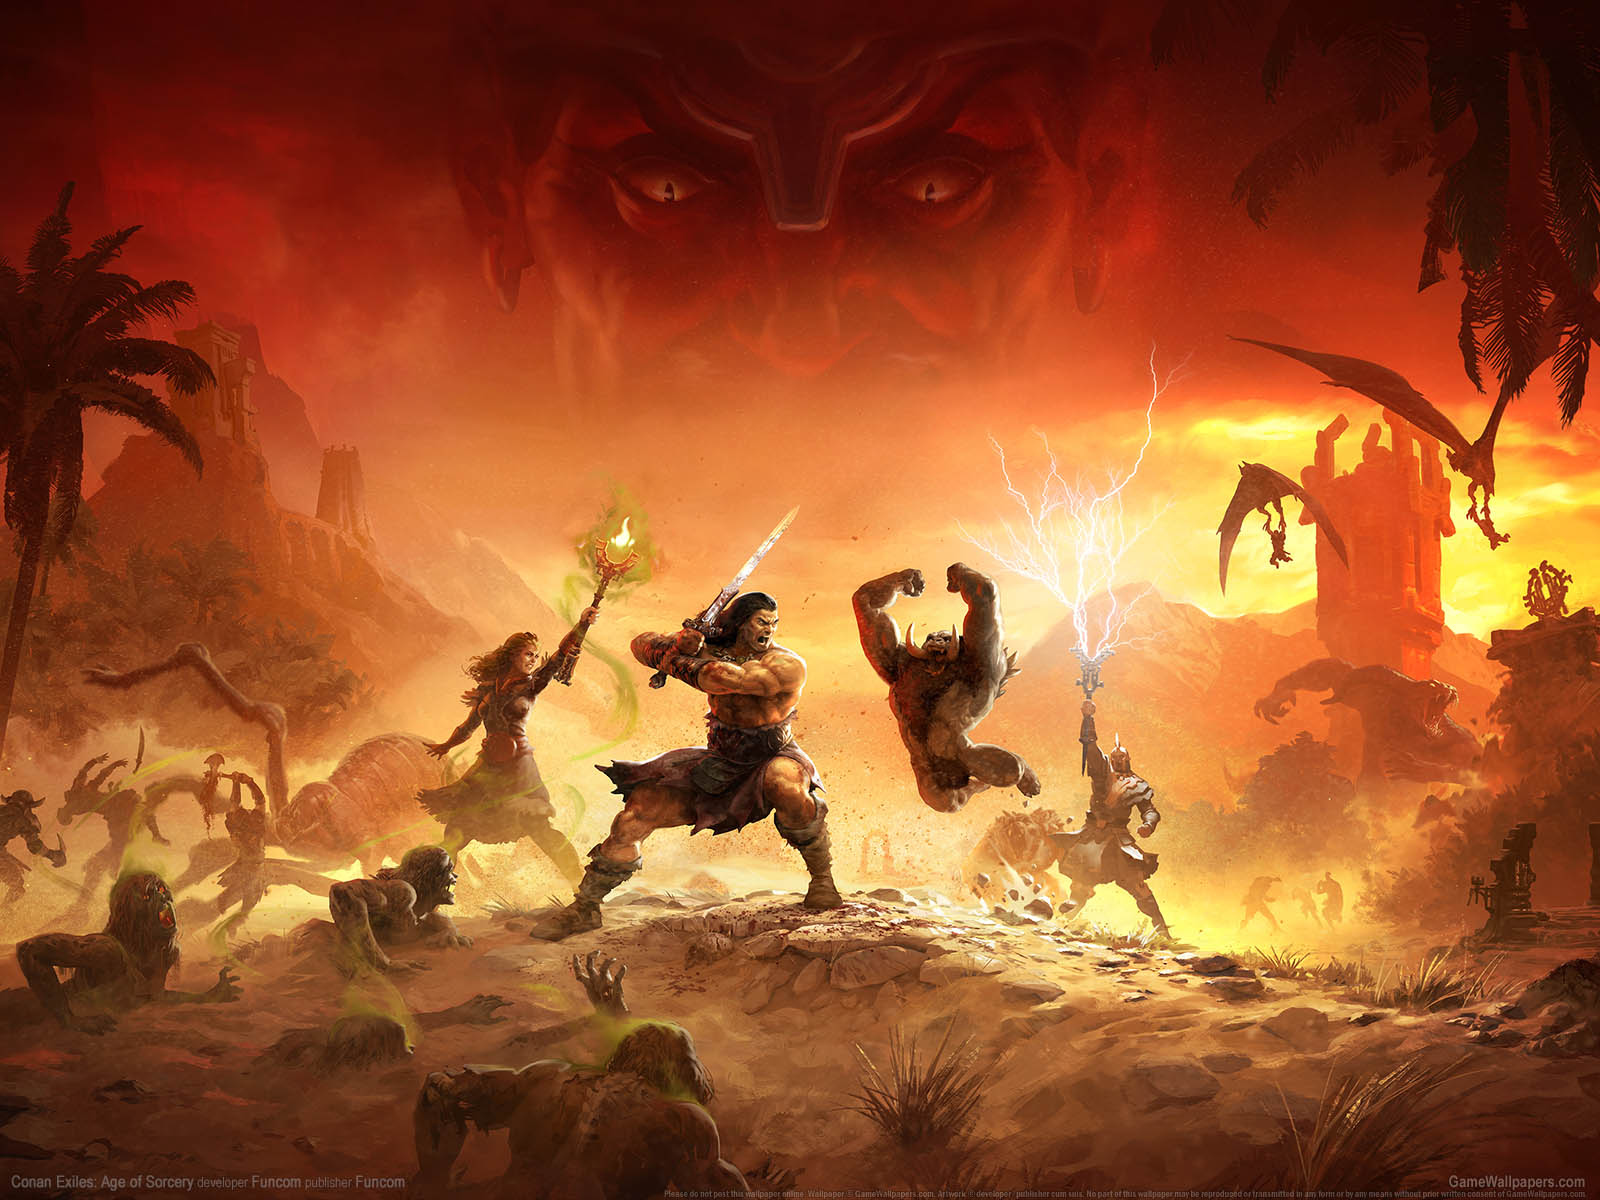 Conan Exiles%3A Age of Sorcery achtergrond 01 1600x1200